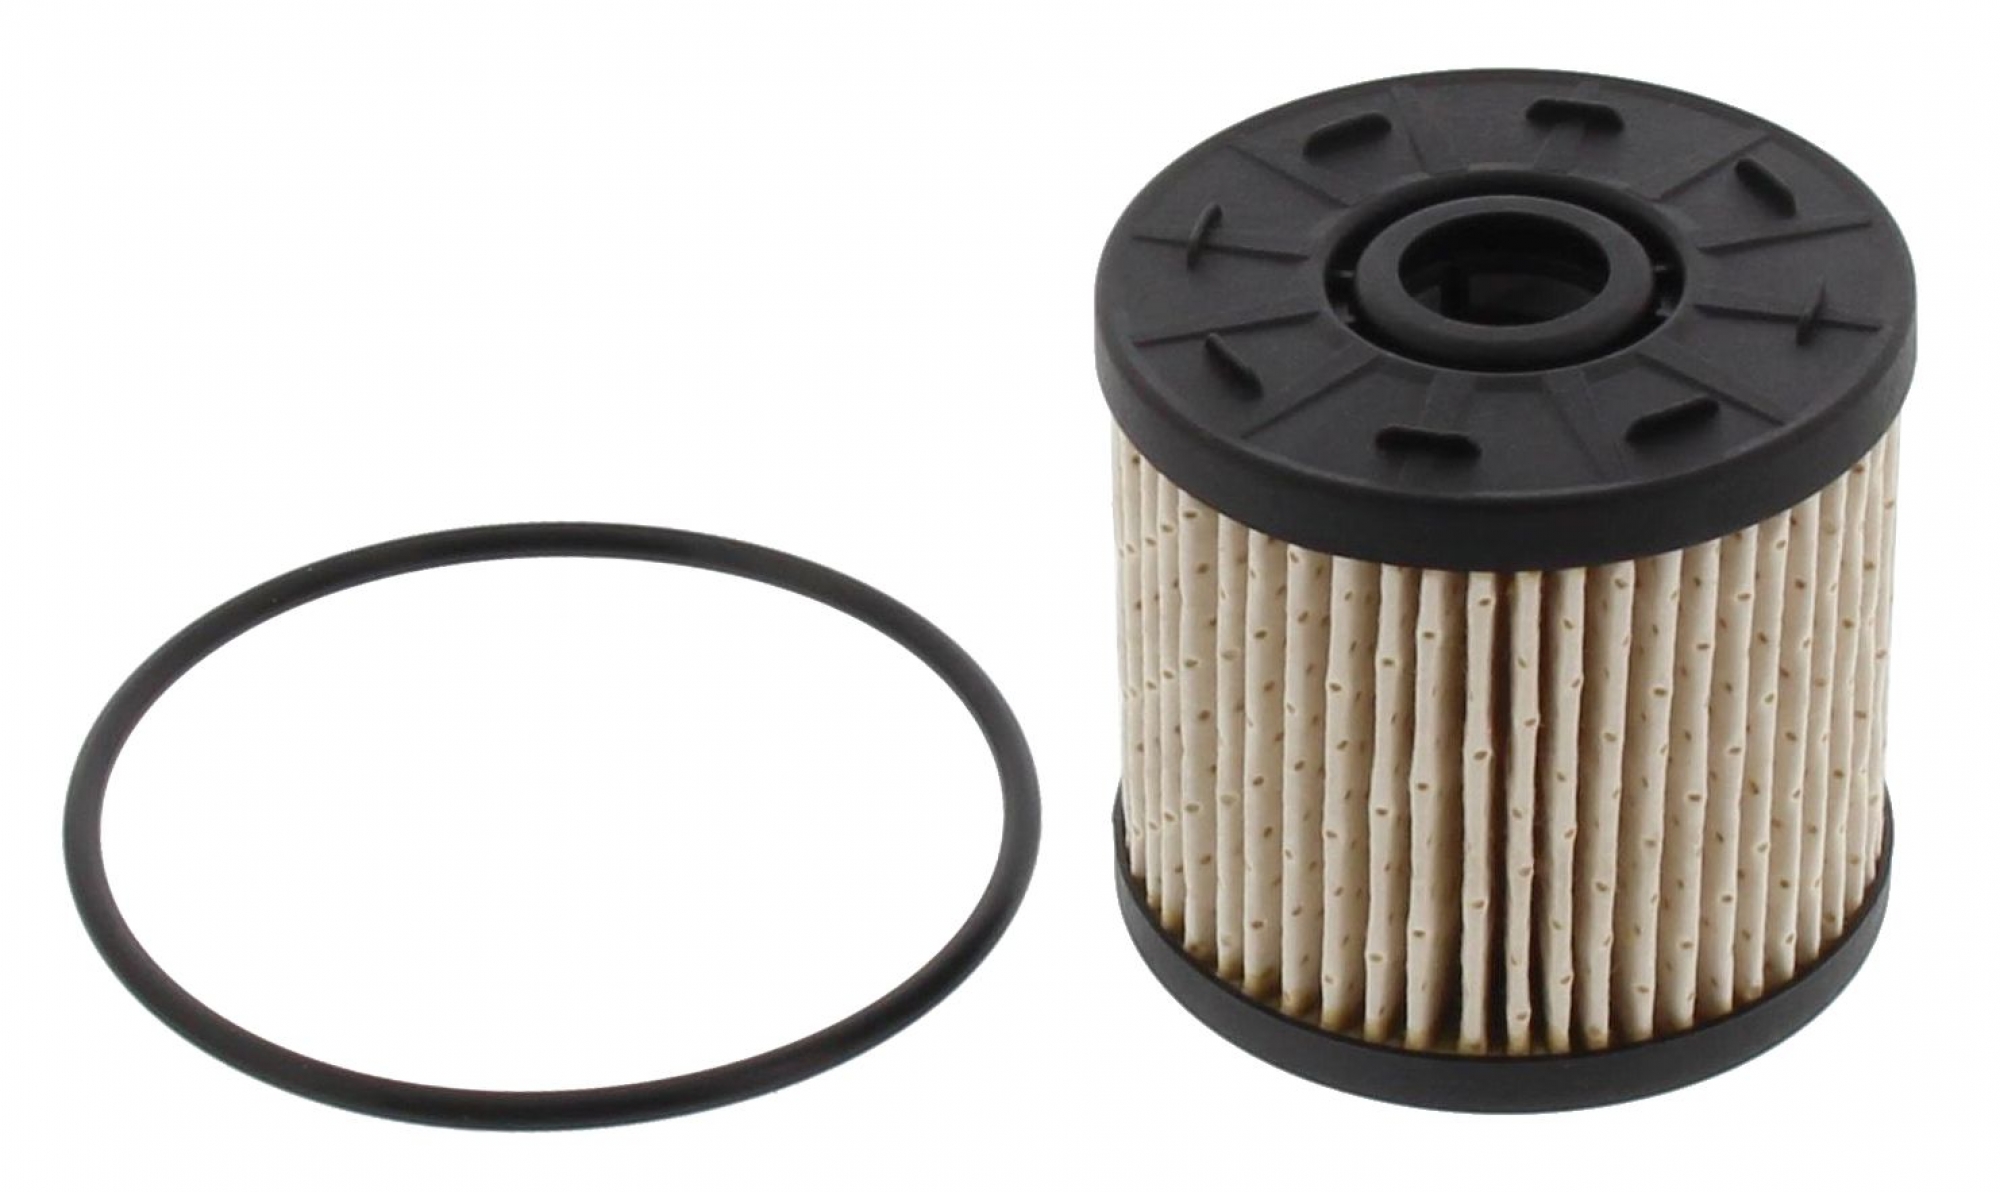 Kraftstofffilter, CITROËN, DS, FORD, FORD USA, OPEL, PEUGEOT, TOYOTA, VAUXHALL